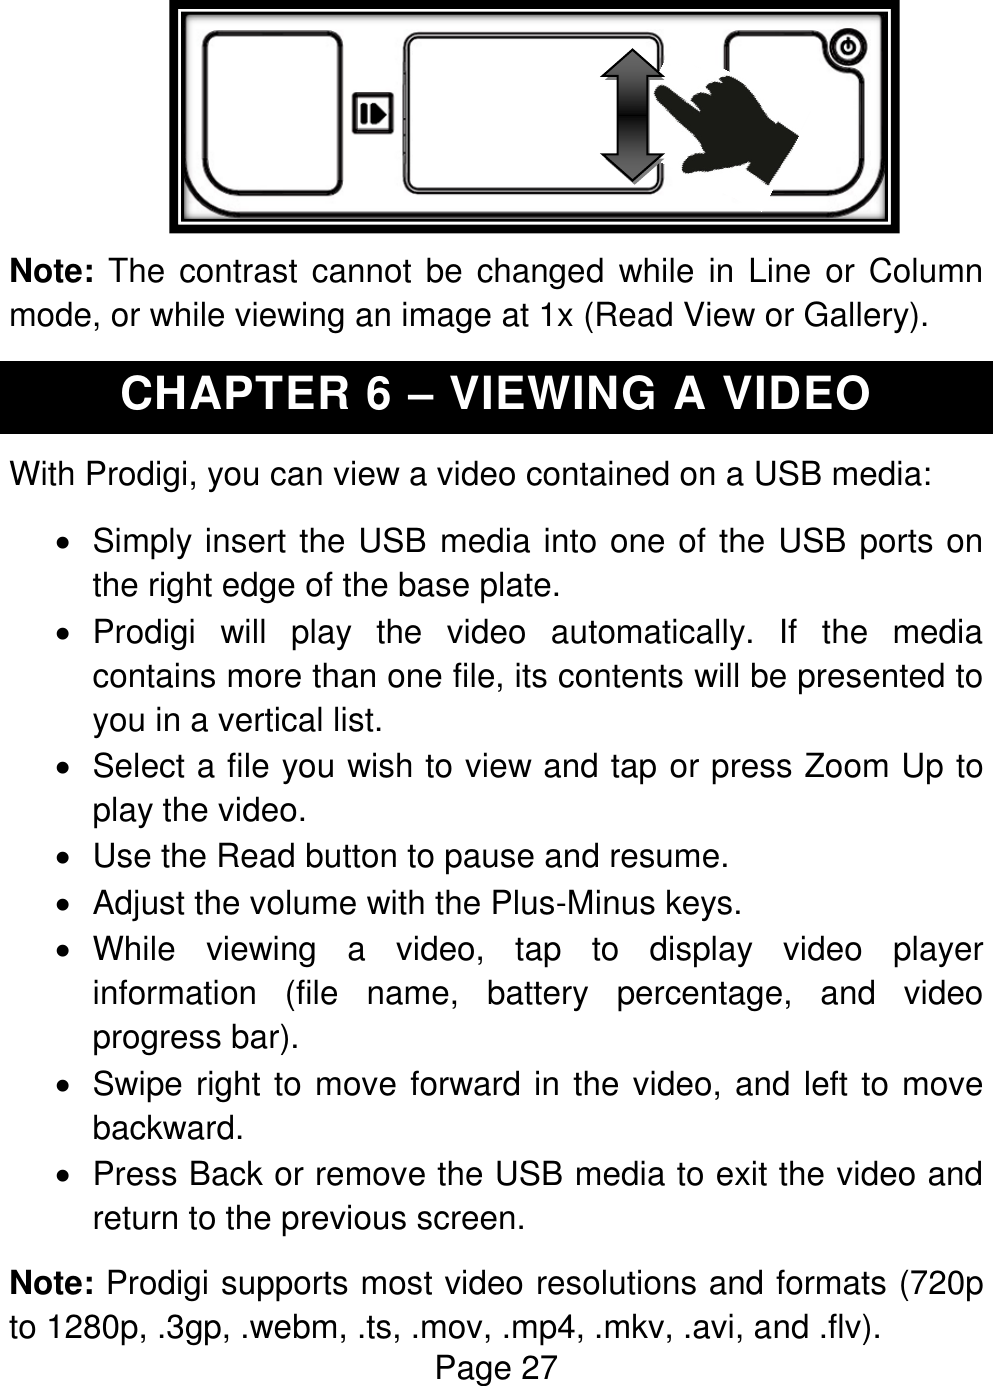 Page 27                Note: The  contrast cannot be changed  while in Line or  Column mode, or while viewing an image at 1x (Read View or Gallery). CHAPTER 6 – VIEWING A VIDEO With Prodigi, you can view a video contained on a USB media:   Simply insert the USB media into one of the USB ports on the right edge of the base plate.   Prodigi  will  play  the  video  automatically.  If  the  media contains more than one file, its contents will be presented to you in a vertical list.    Select a file you wish to view and tap or press Zoom Up to play the video.   Use the Read button to pause and resume.   Adjust the volume with the Plus-Minus keys.   While  viewing  a  video,  tap  to  display  video  player information  (file  name,  battery  percentage,  and  video progress bar).   Swipe right to move forward in the video, and left to move backward.   Press Back or remove the USB media to exit the video and return to the previous screen. Note: Prodigi supports most video resolutions and formats (720p to 1280p, .3gp, .webm, .ts, .mov, .mp4, .mkv, .avi, and .flv). 